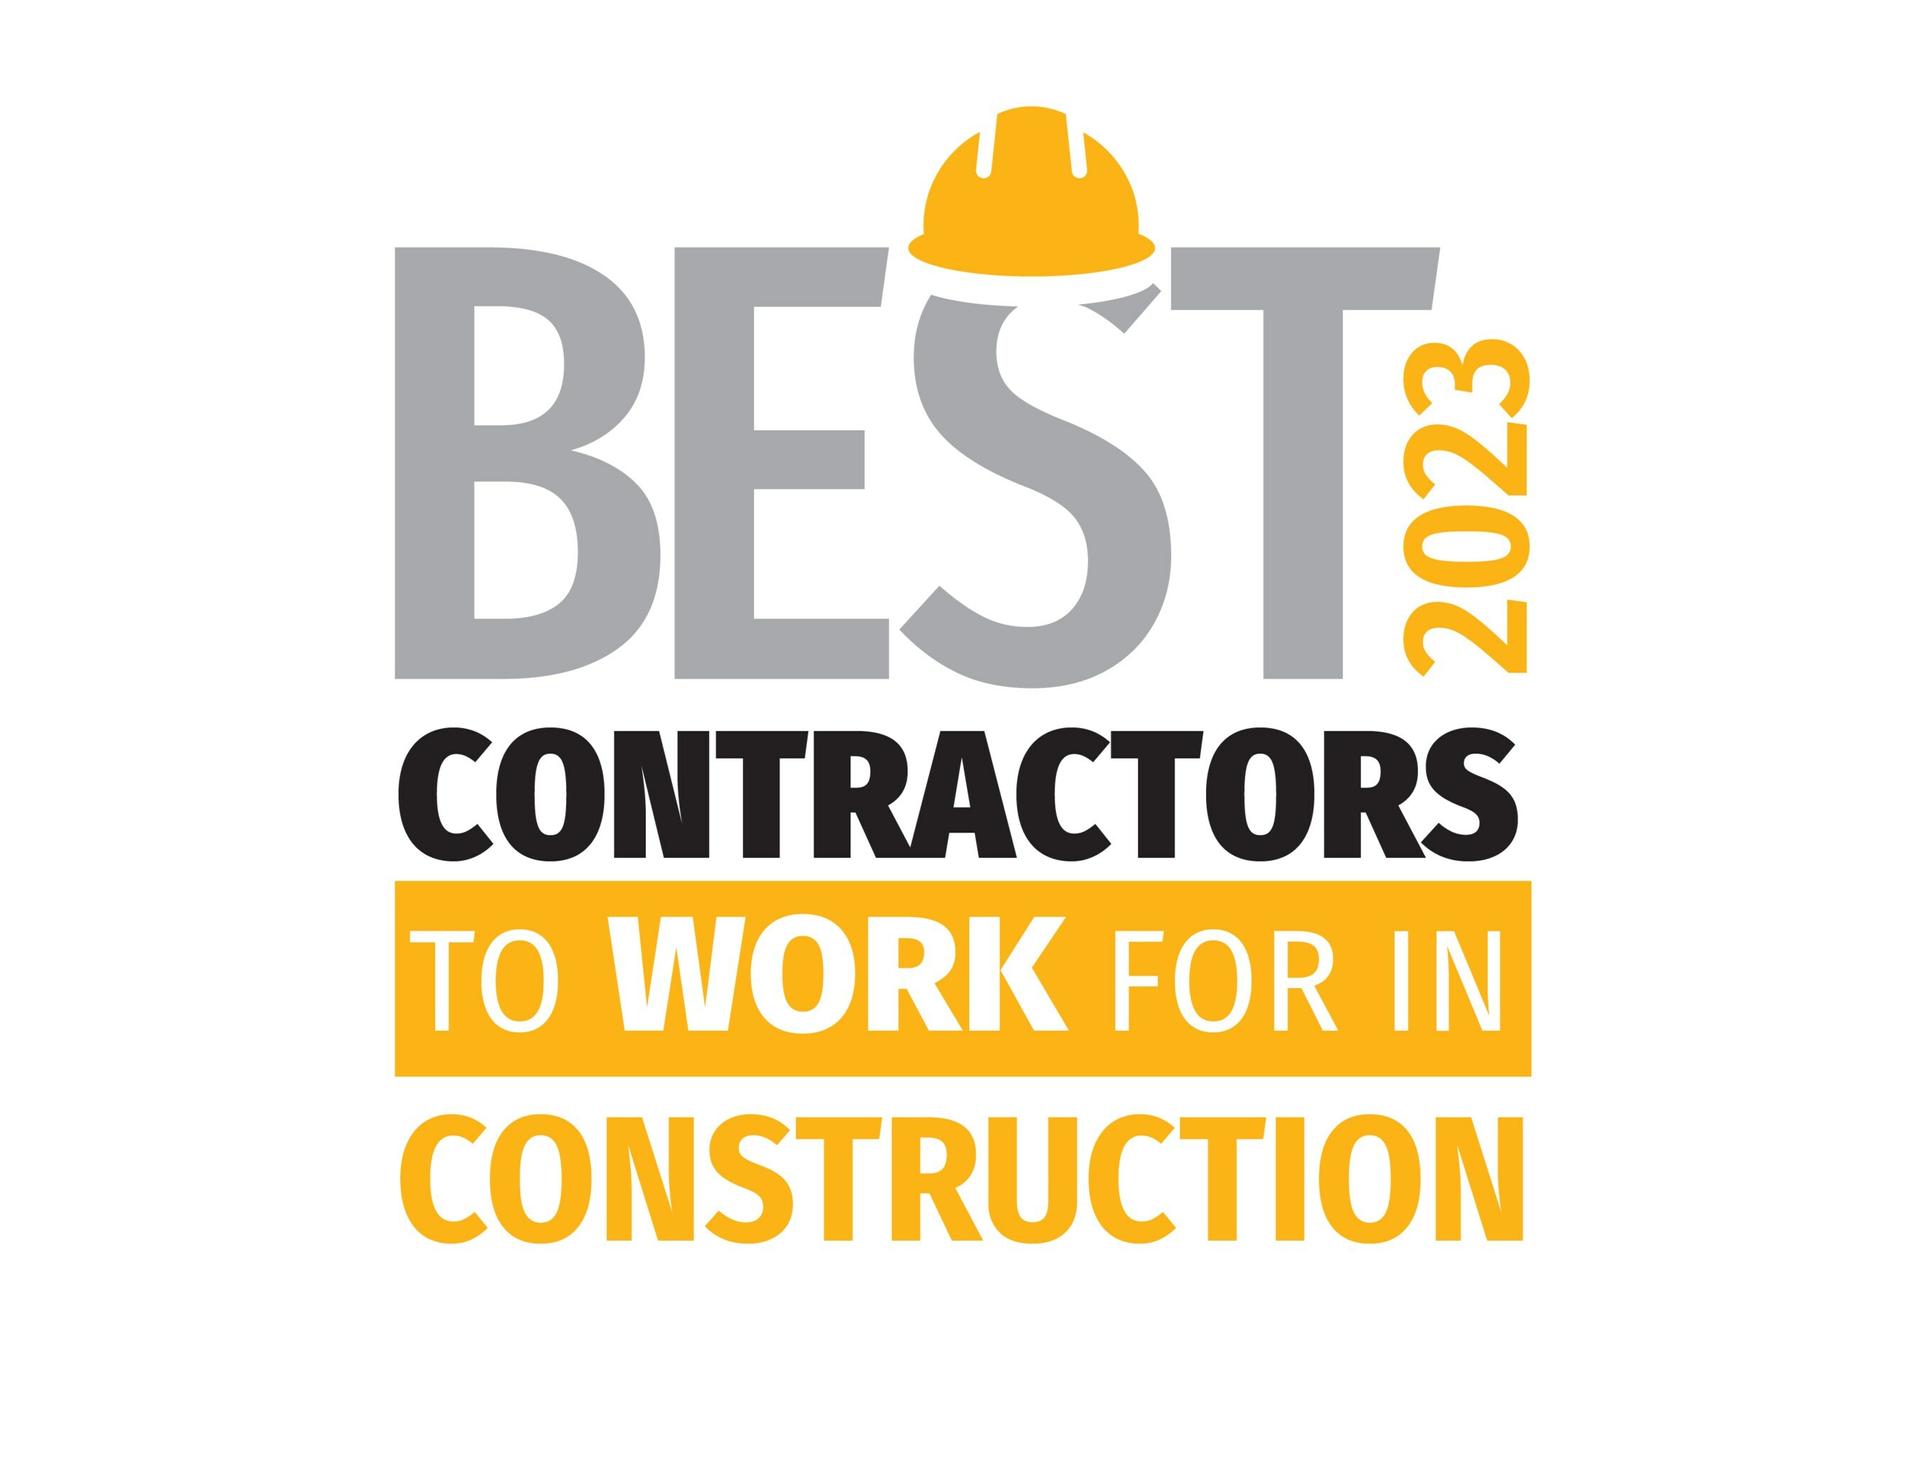 ForConstructionPros.com Reveals the 2023 Best Contractors to Work for in Construction